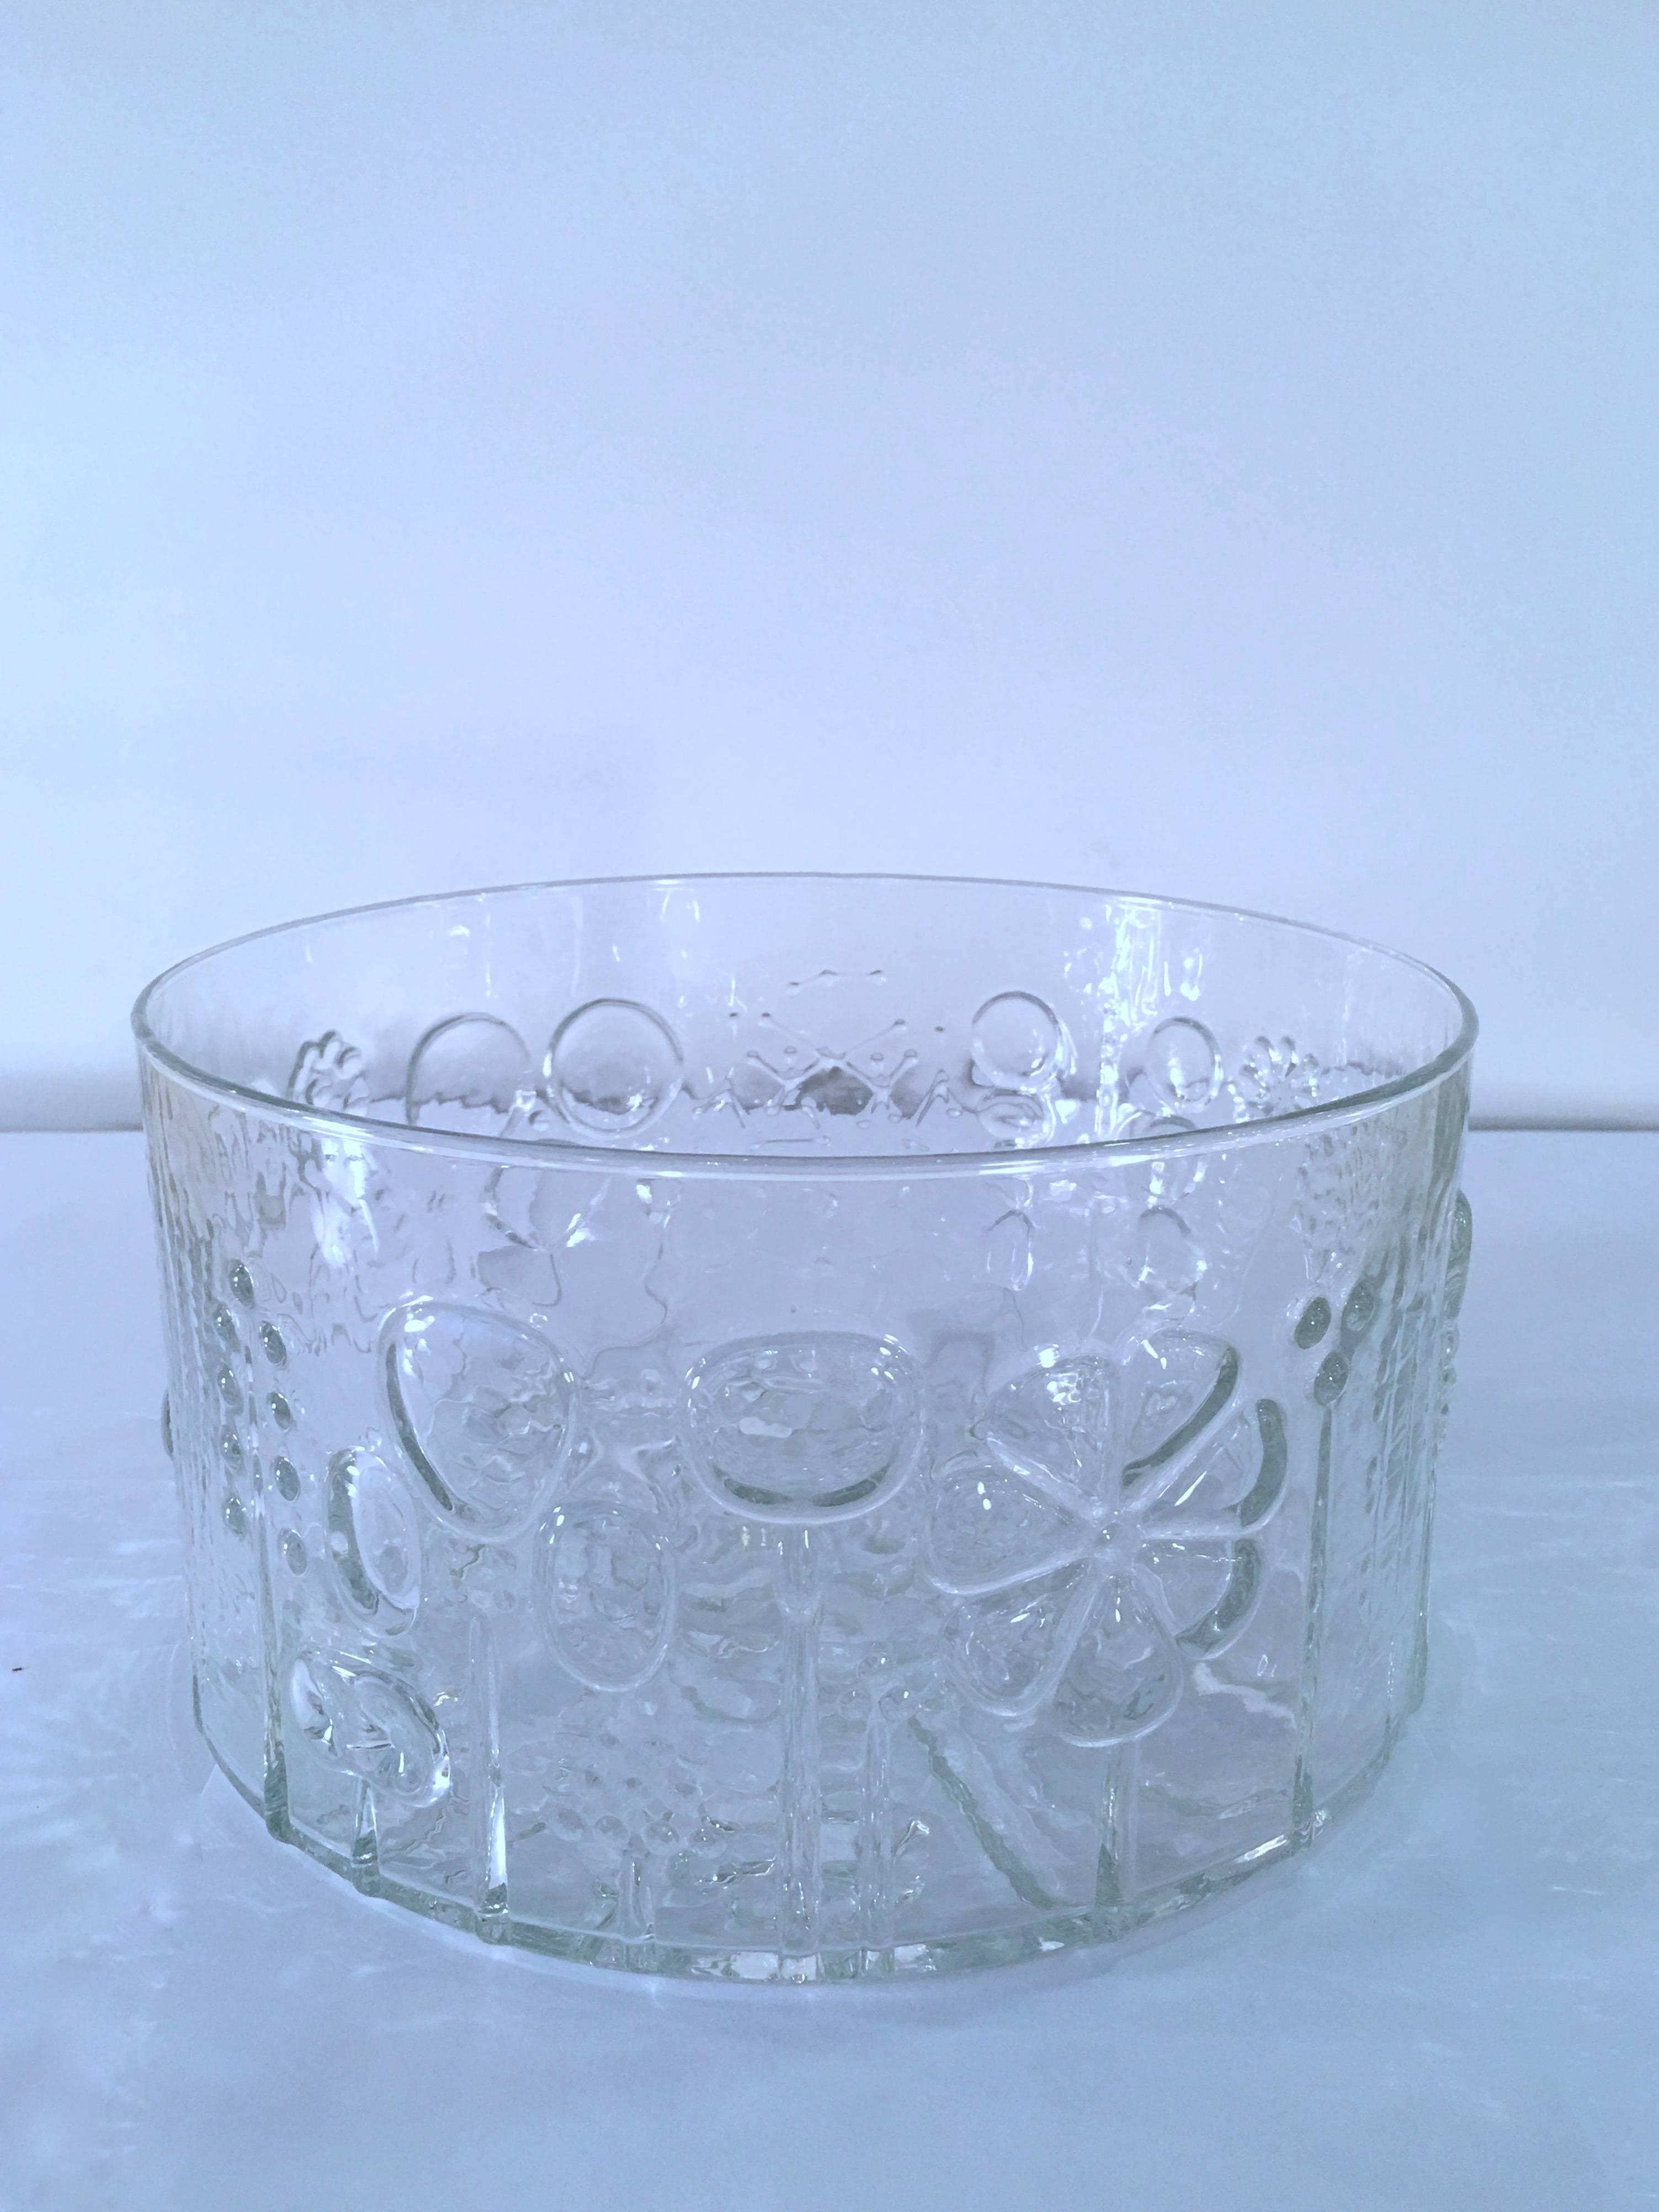 Charming crystal fruit bowl or centerpiece in the Flora series by Oiva Toikka. More pieces, sizes, colors available. Please contact for location. 